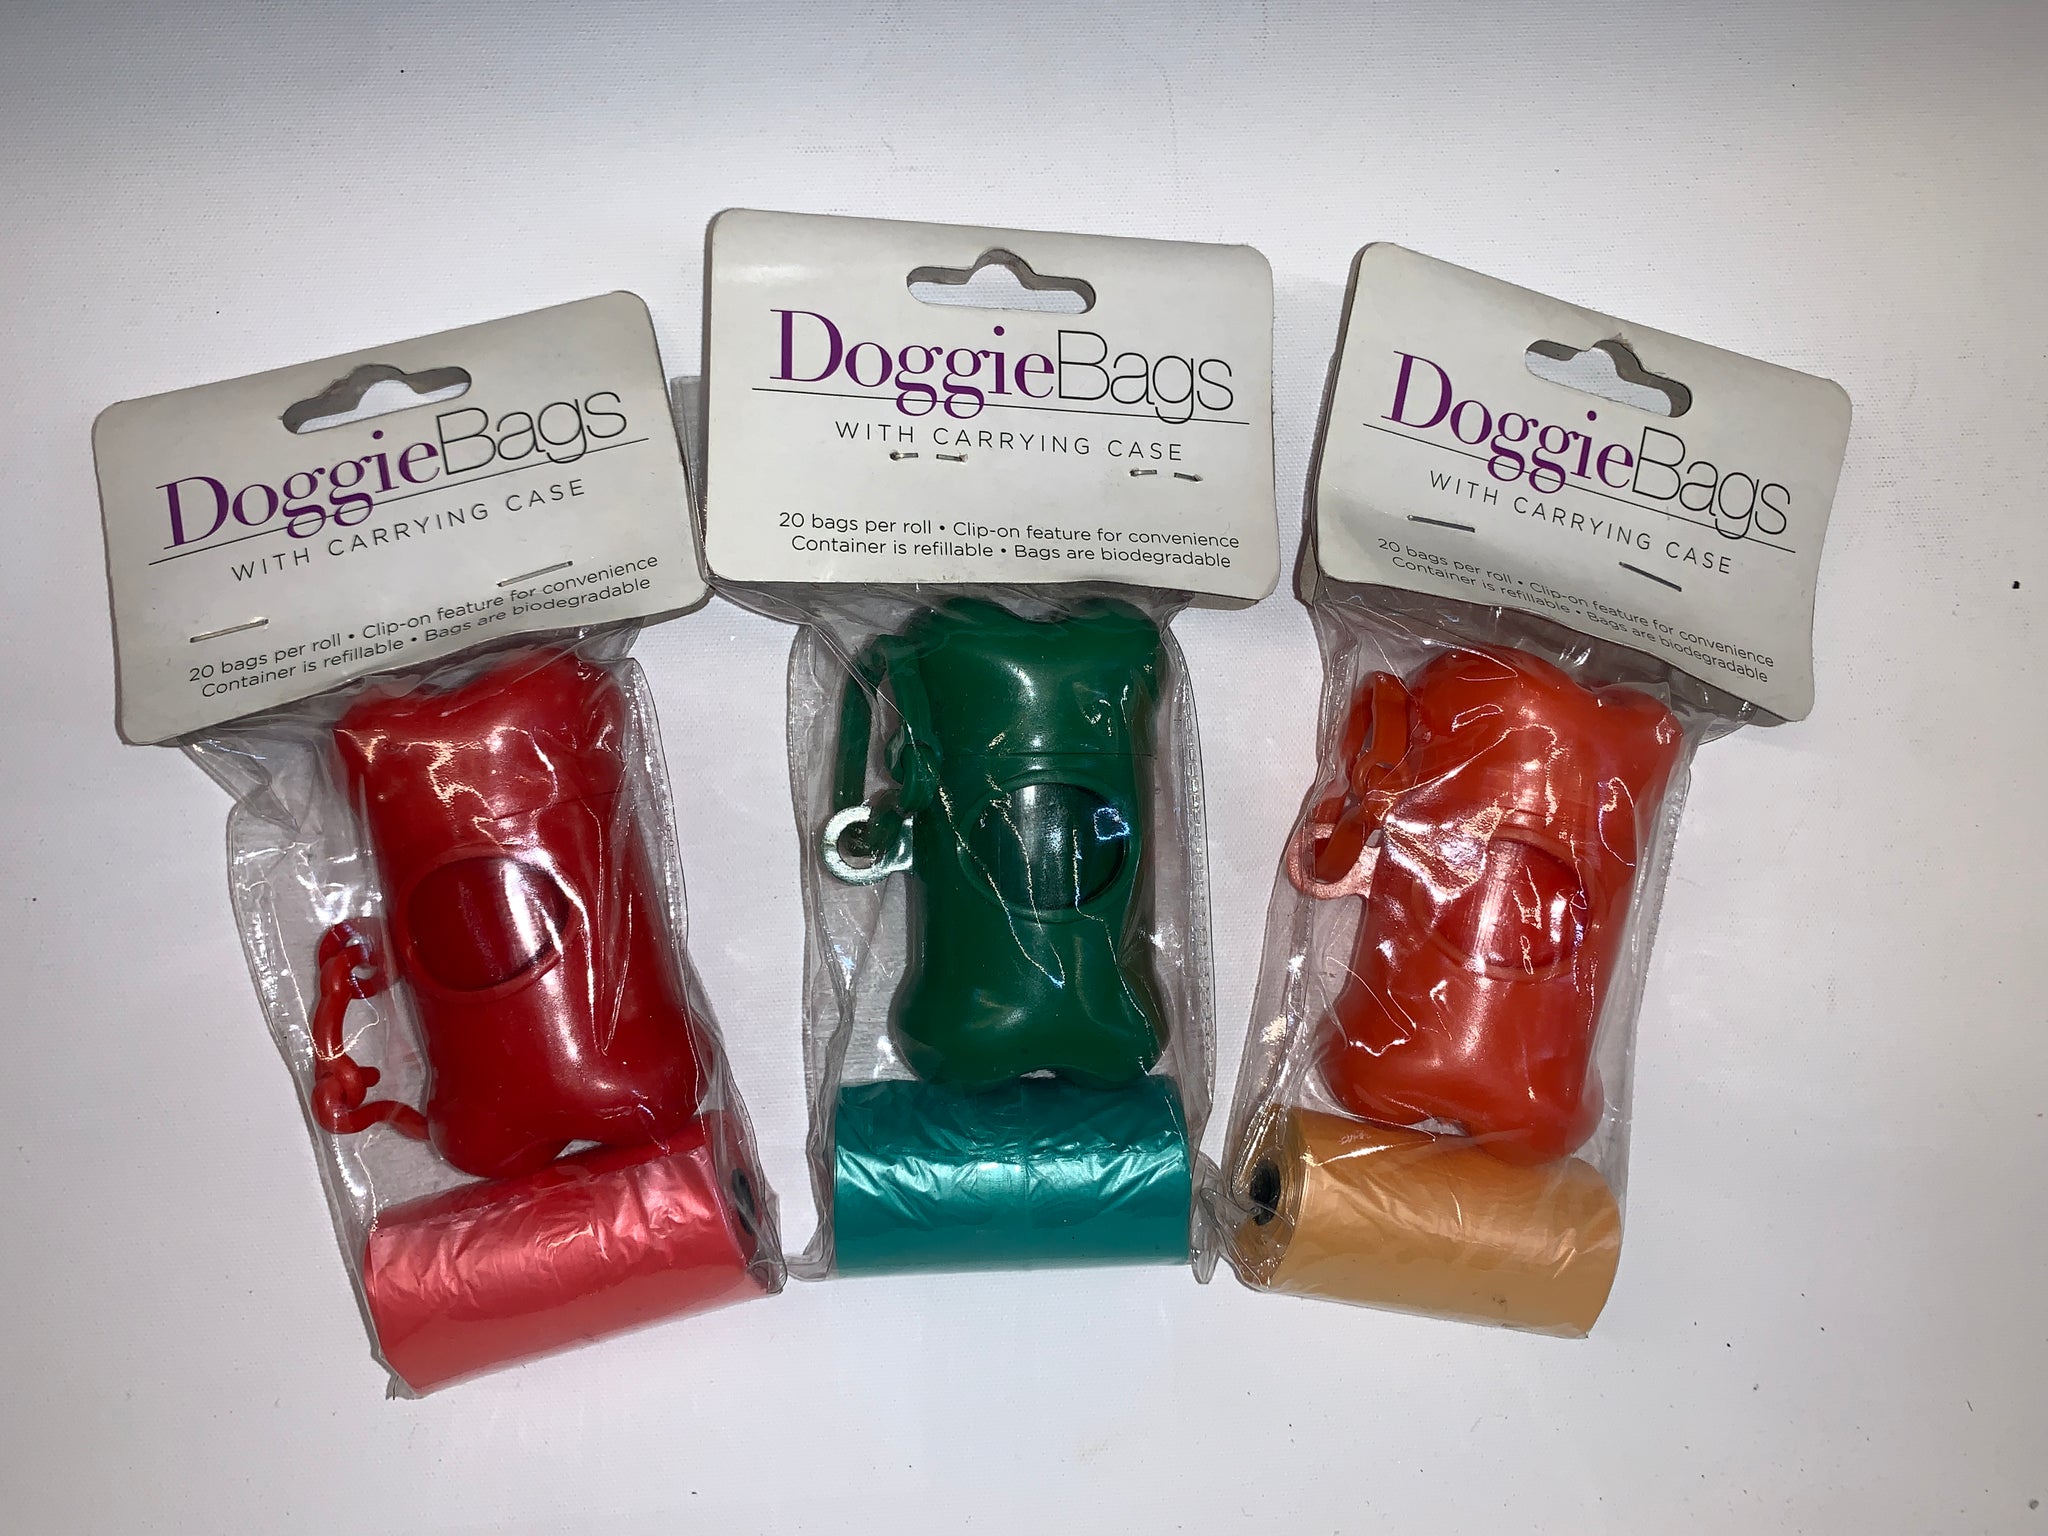 Doggie Bags with Carrying Case